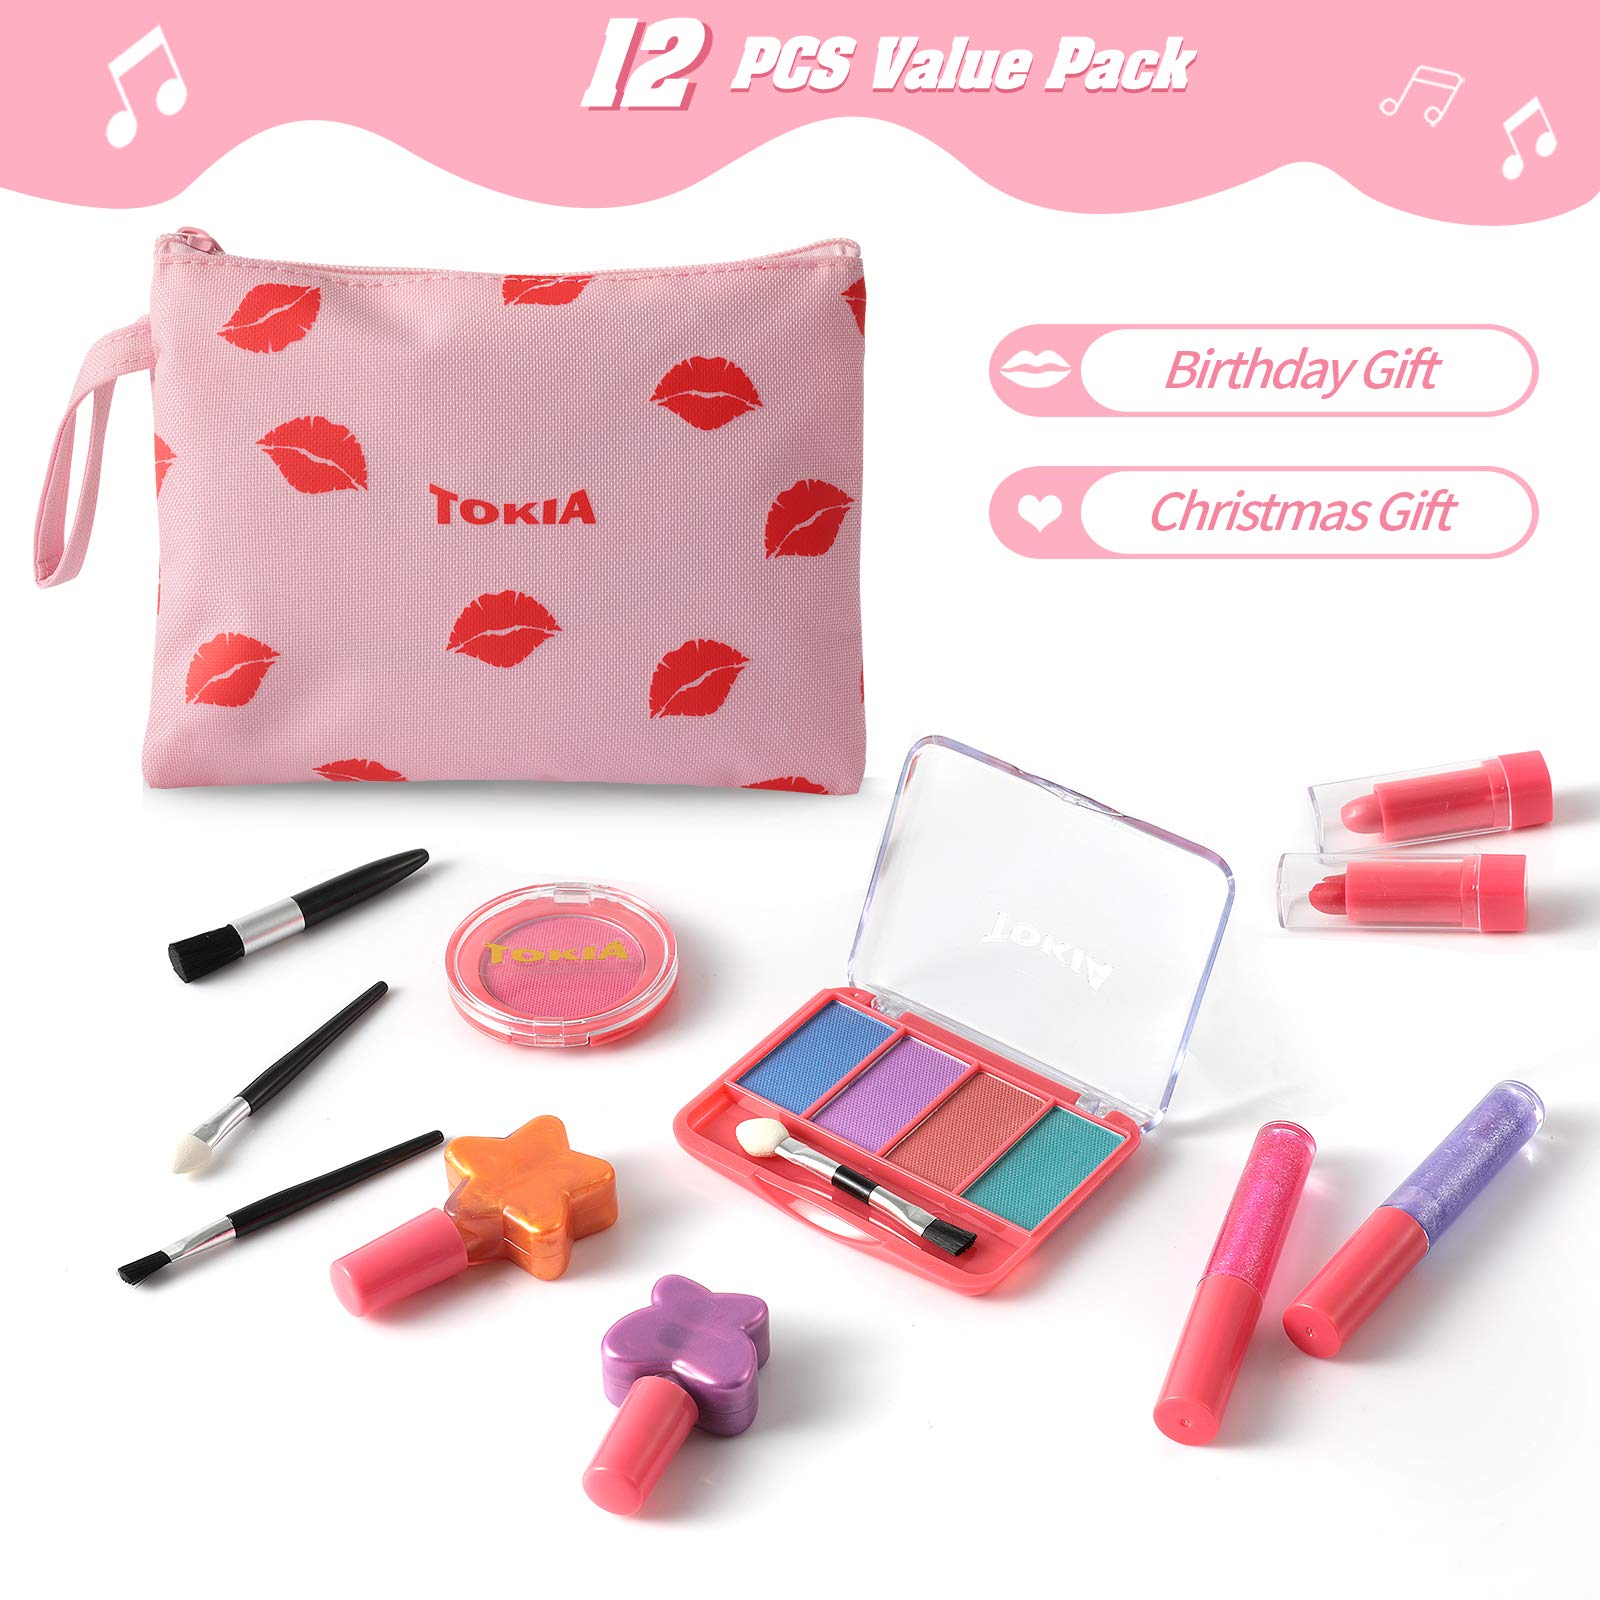 Kids Makeup Kit for Girl, Washable Non-Toxic Little Girl Makeup Set with Cosmetic Bag